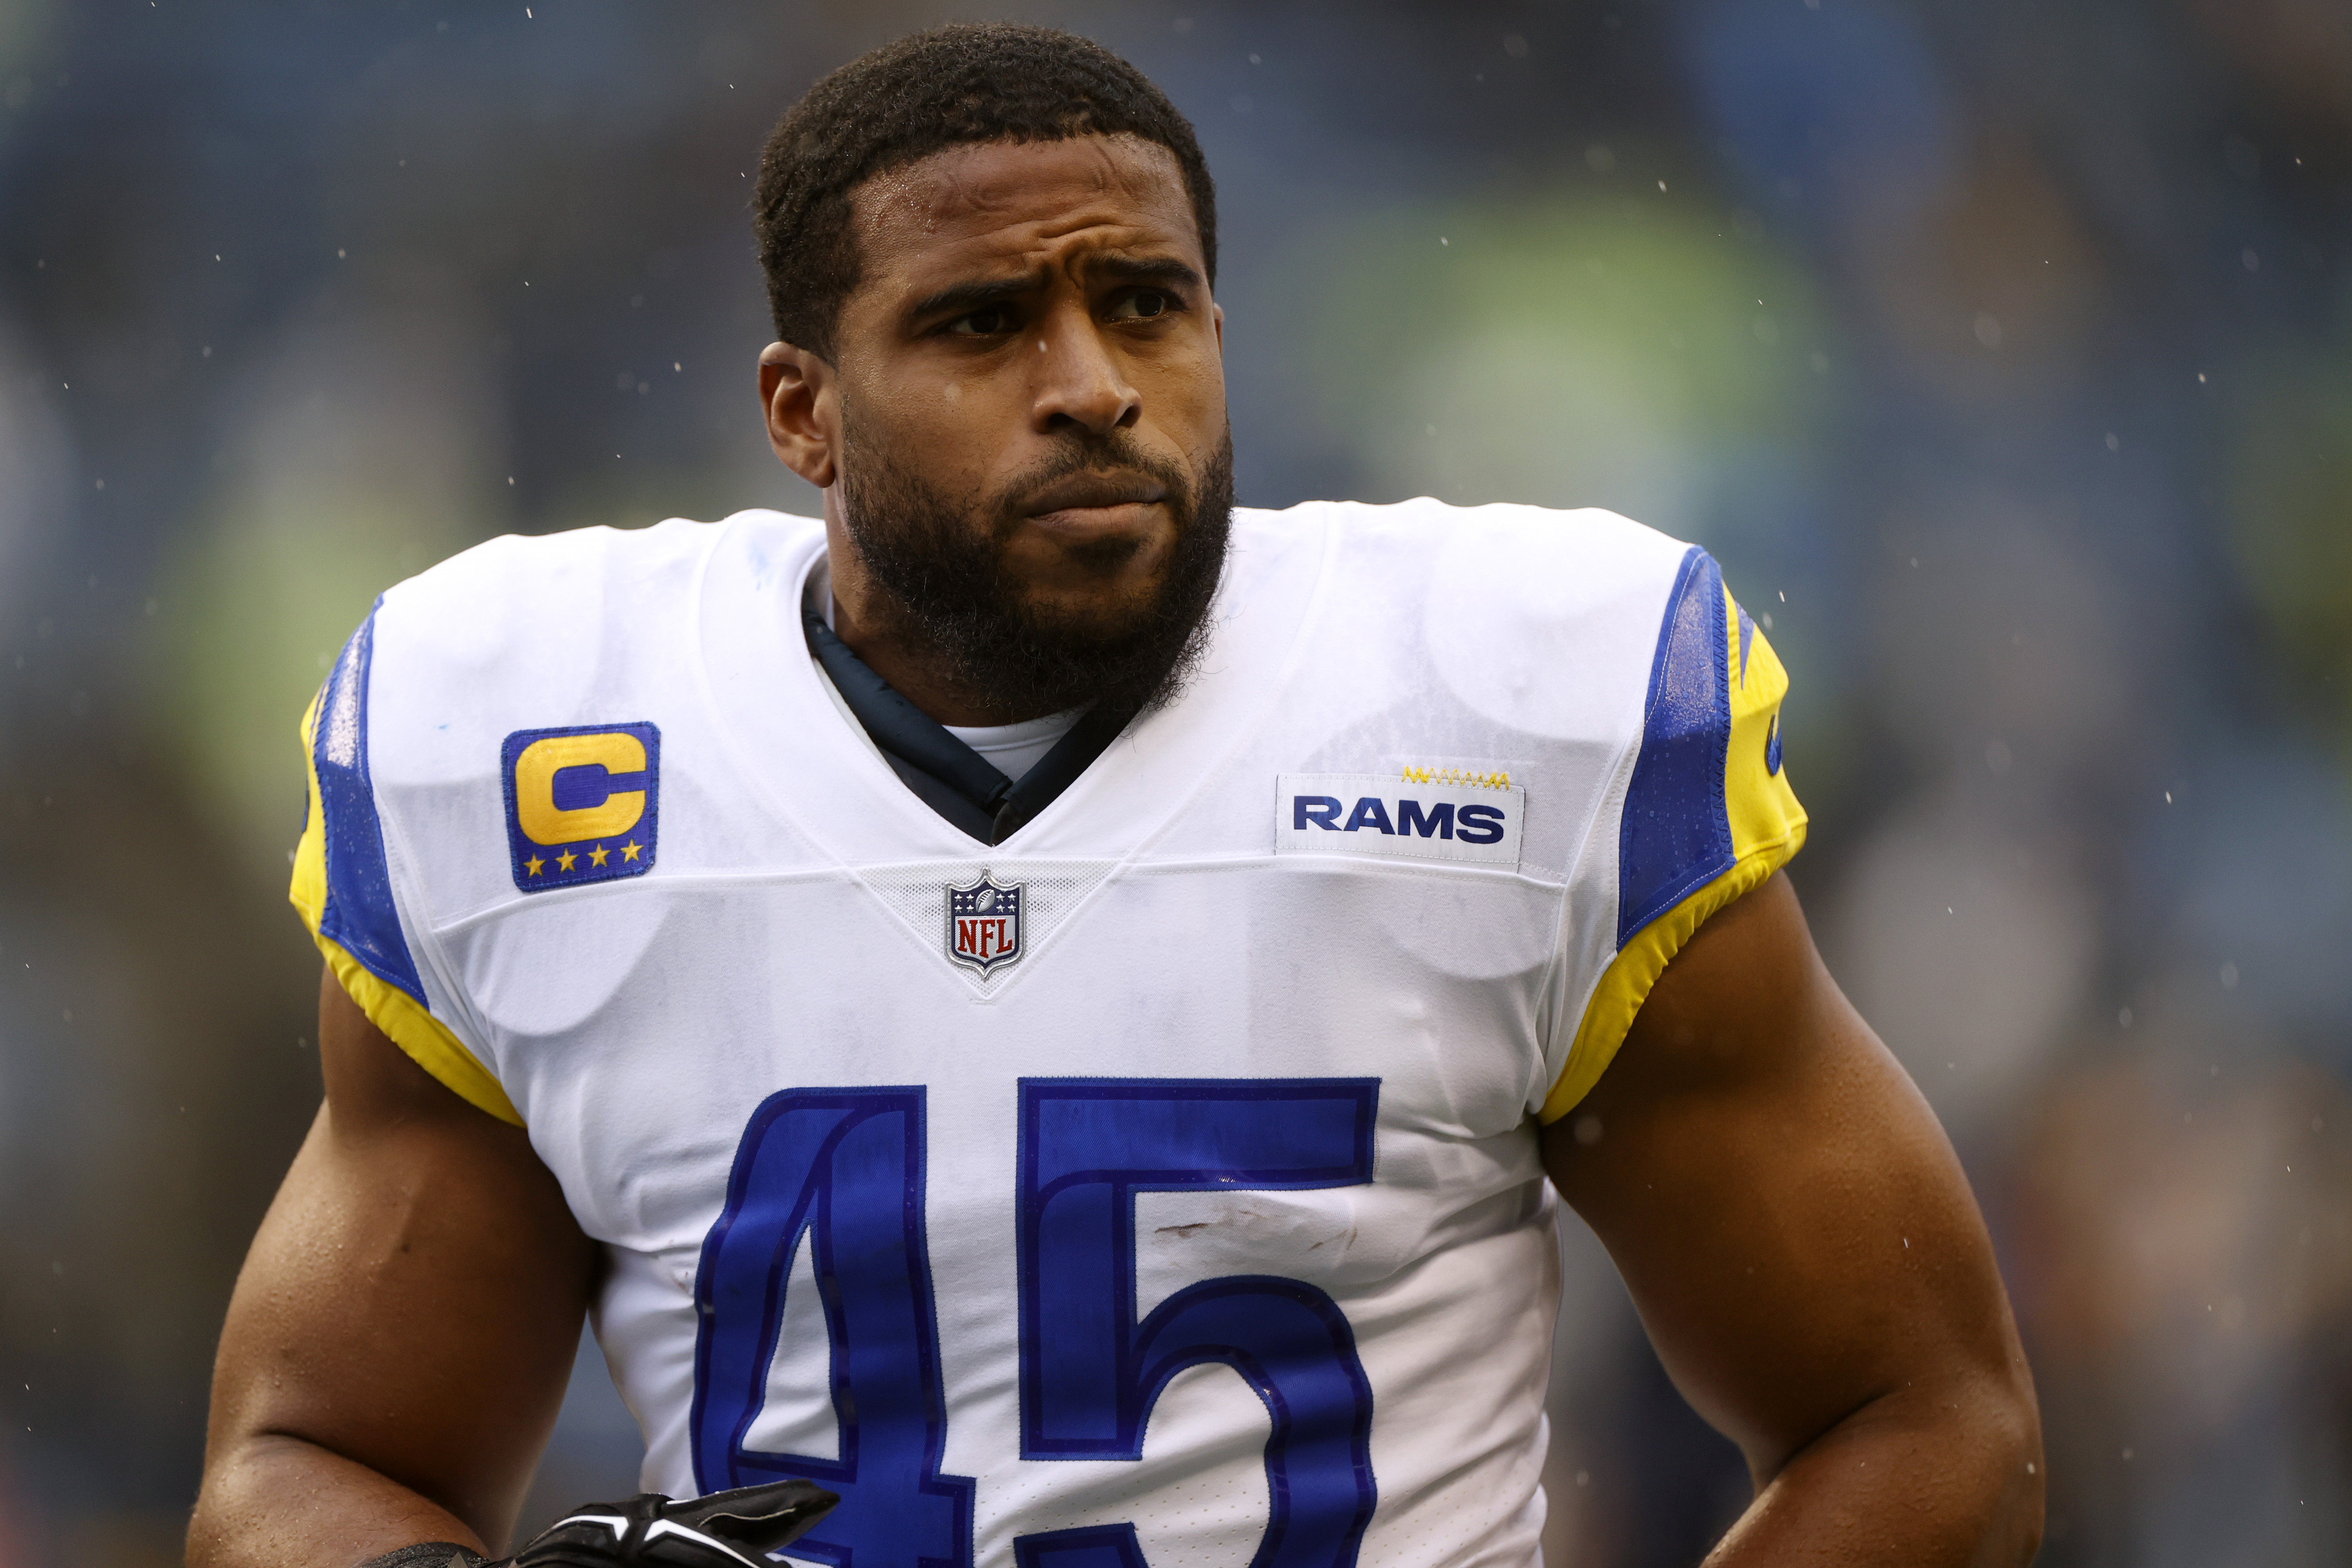 Rams signing LB Bobby Wagner to five-year, $50M deal